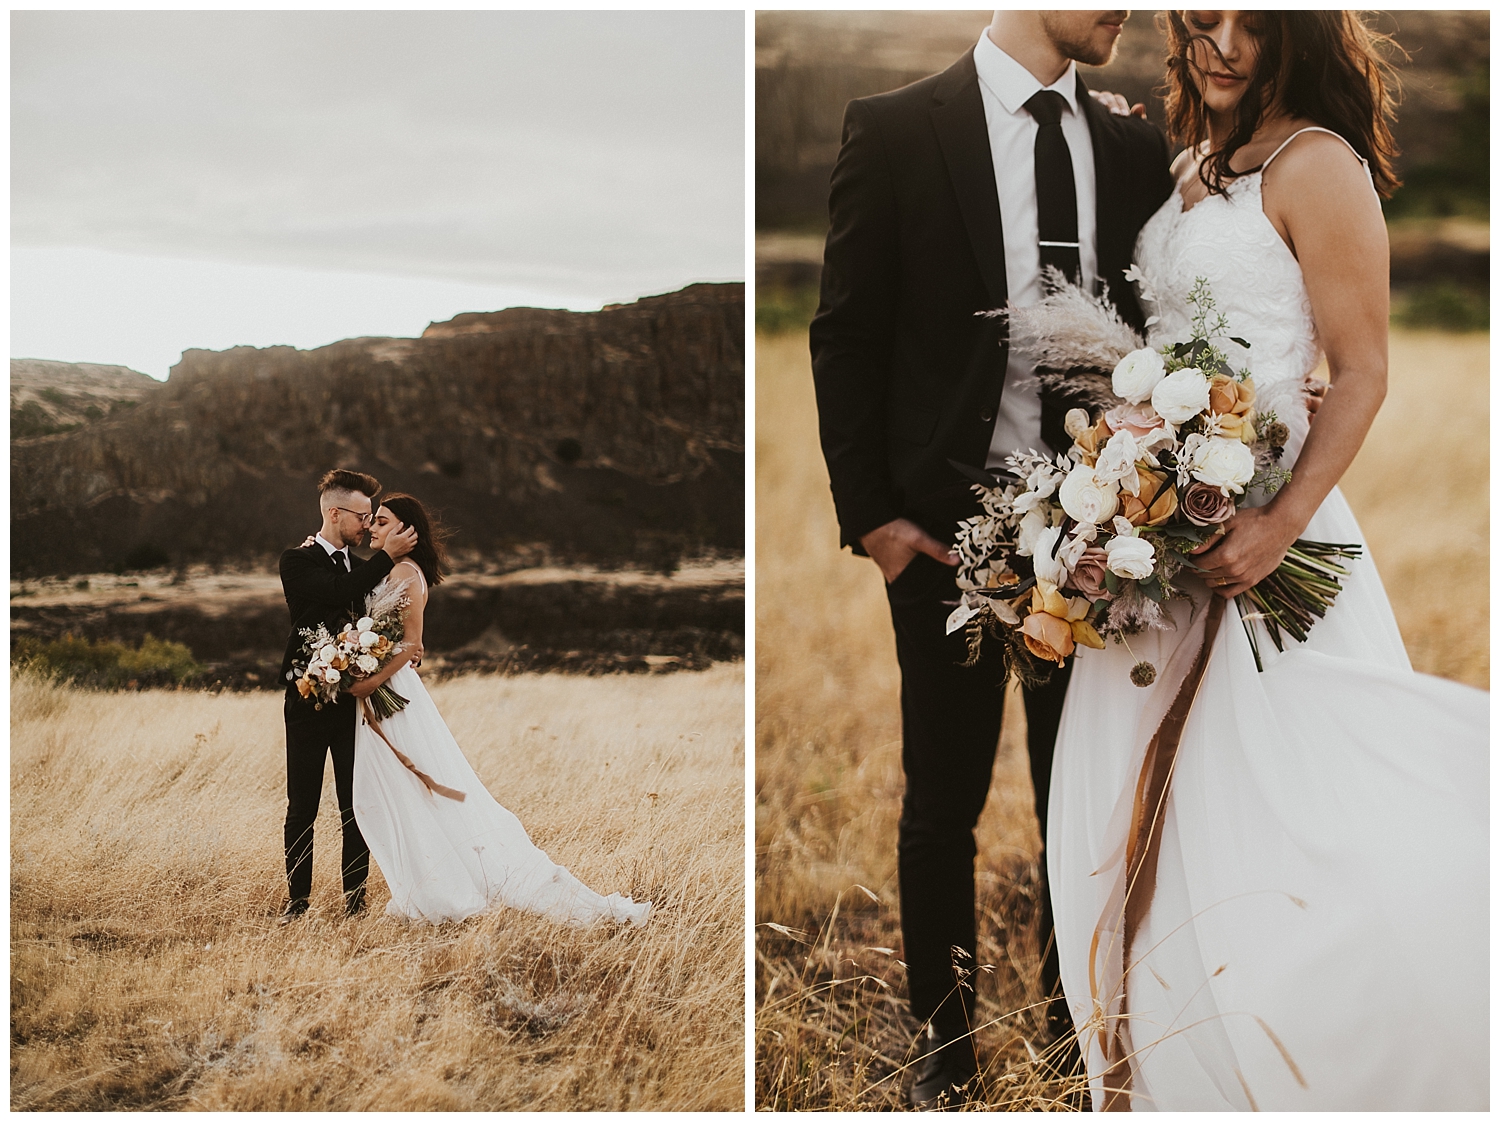 a bride and groom stand together in the desert, her dress and the ribbon on her bouquet blowing in the wind